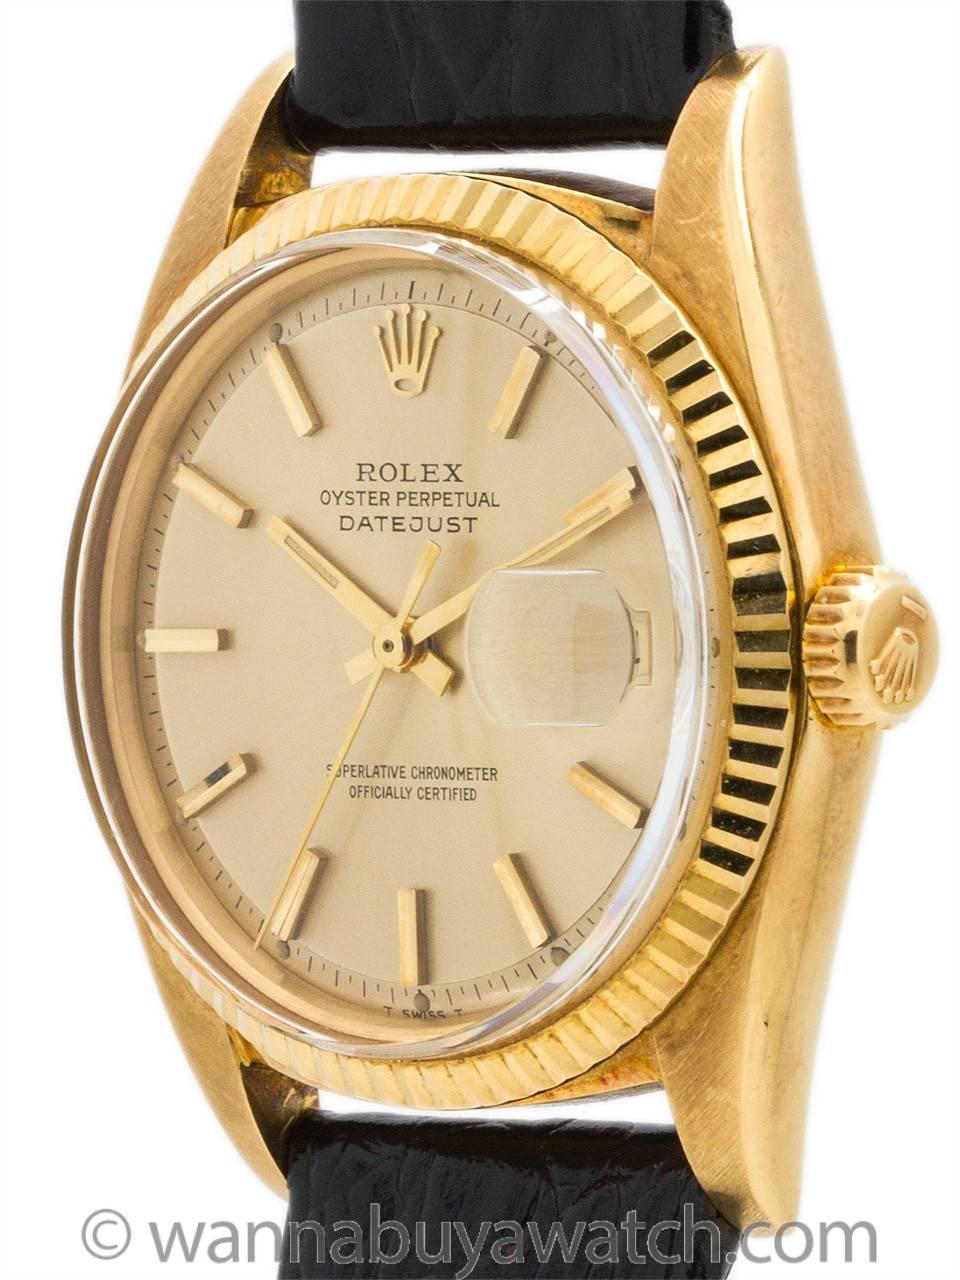 Rolex Datejust ref 1601 18K YG case serial# 2.8 million circa 1971. Featuring full size 36mm diameter vintage man’s model with fluted bezel and acrylic crystal and with very pleasing “soft” matte champagne pie pan dial with applied gold indexes and